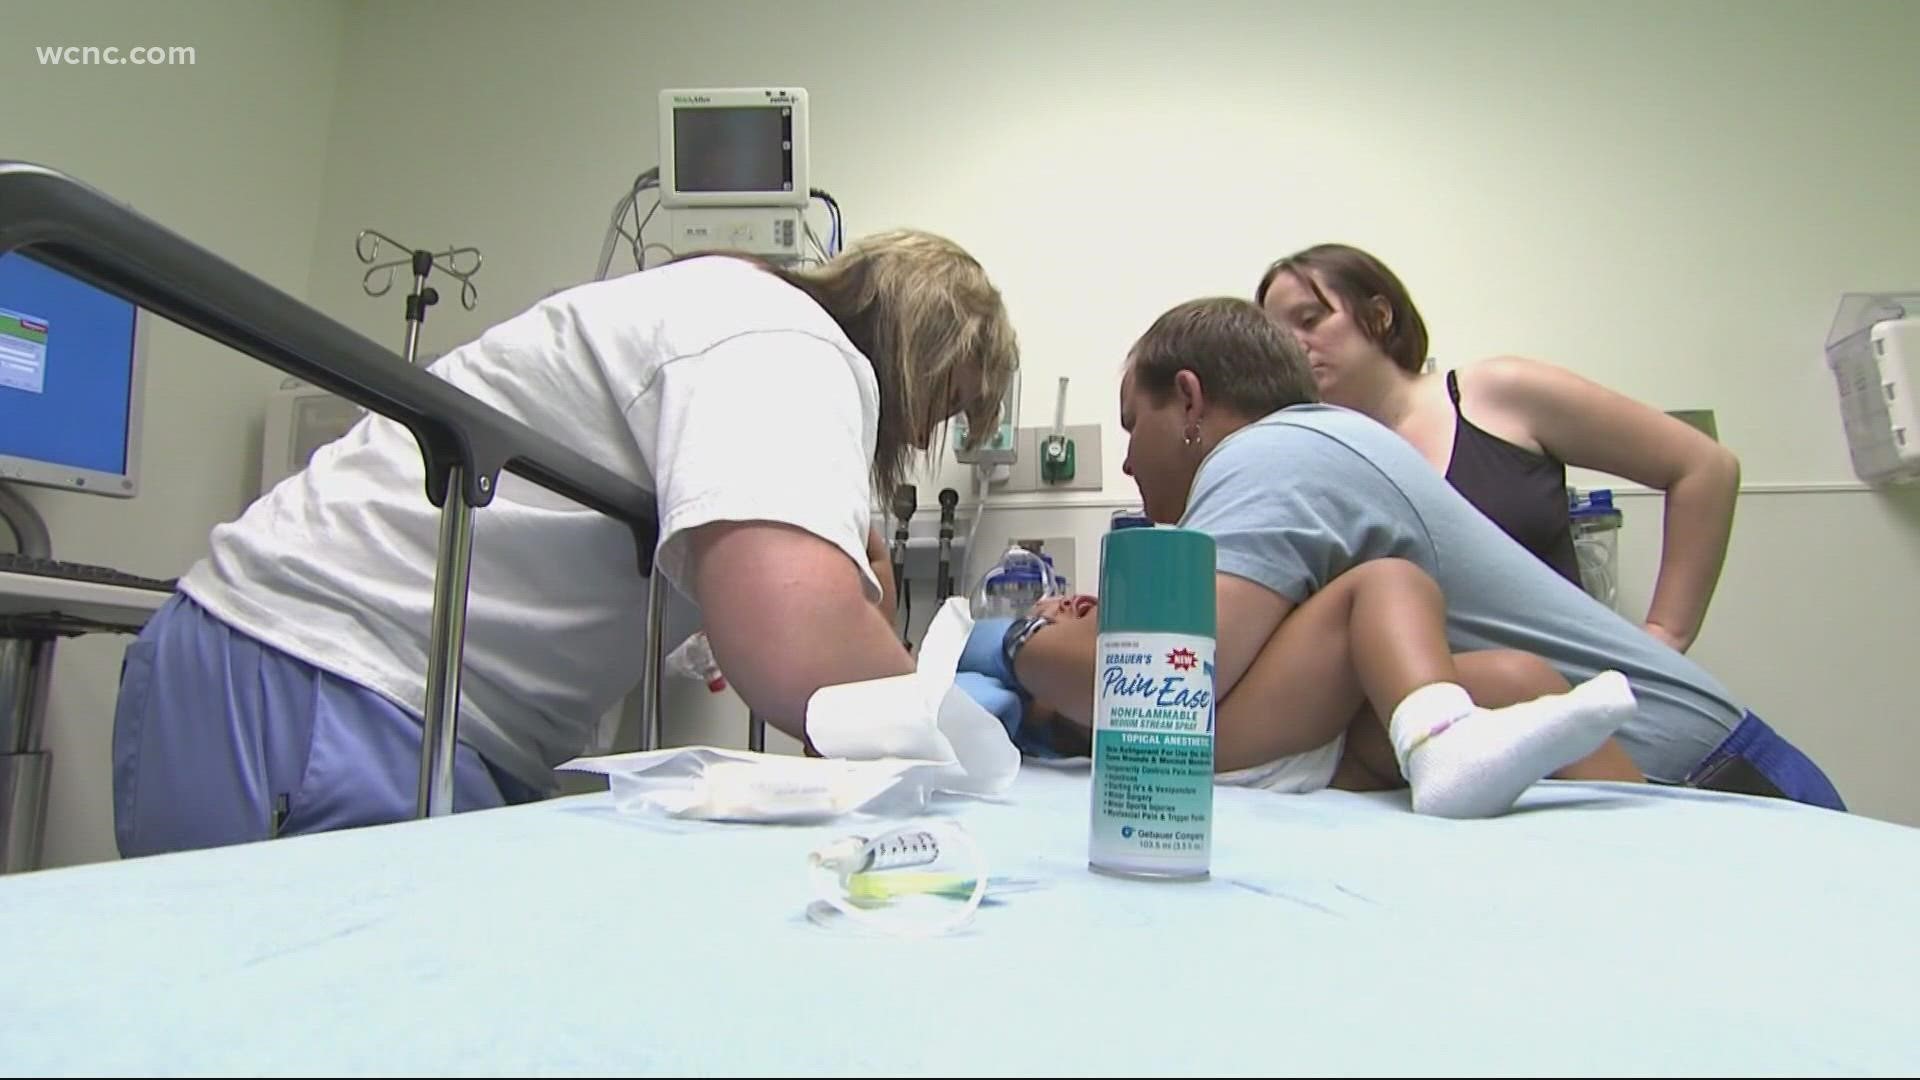 Doctors in Mecklenburg County say they've seen a major increase in the past two months.